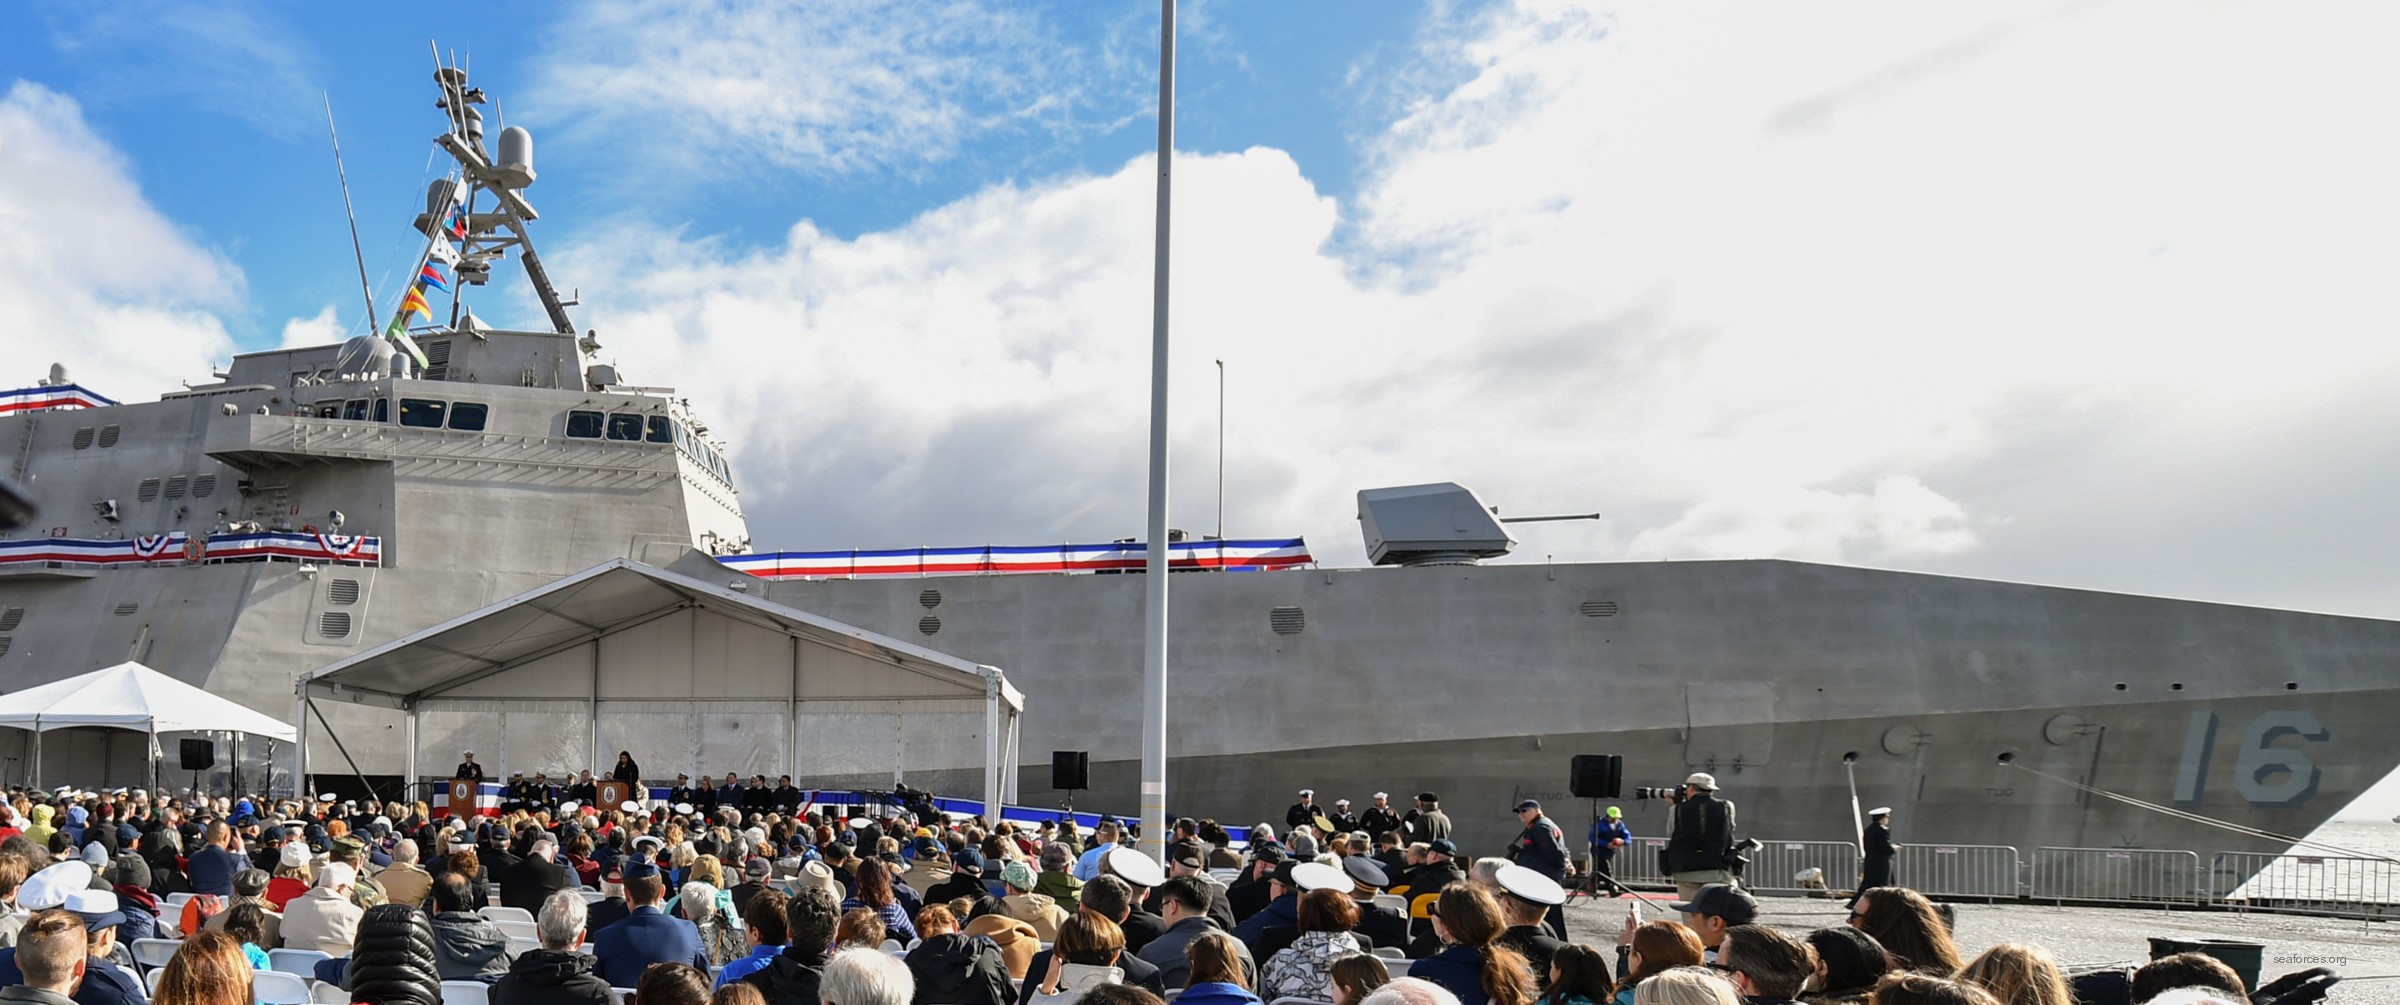 lcs-16 uss tulsa independence class littoral combat ship navy 07 commissioning san francisco february 2019